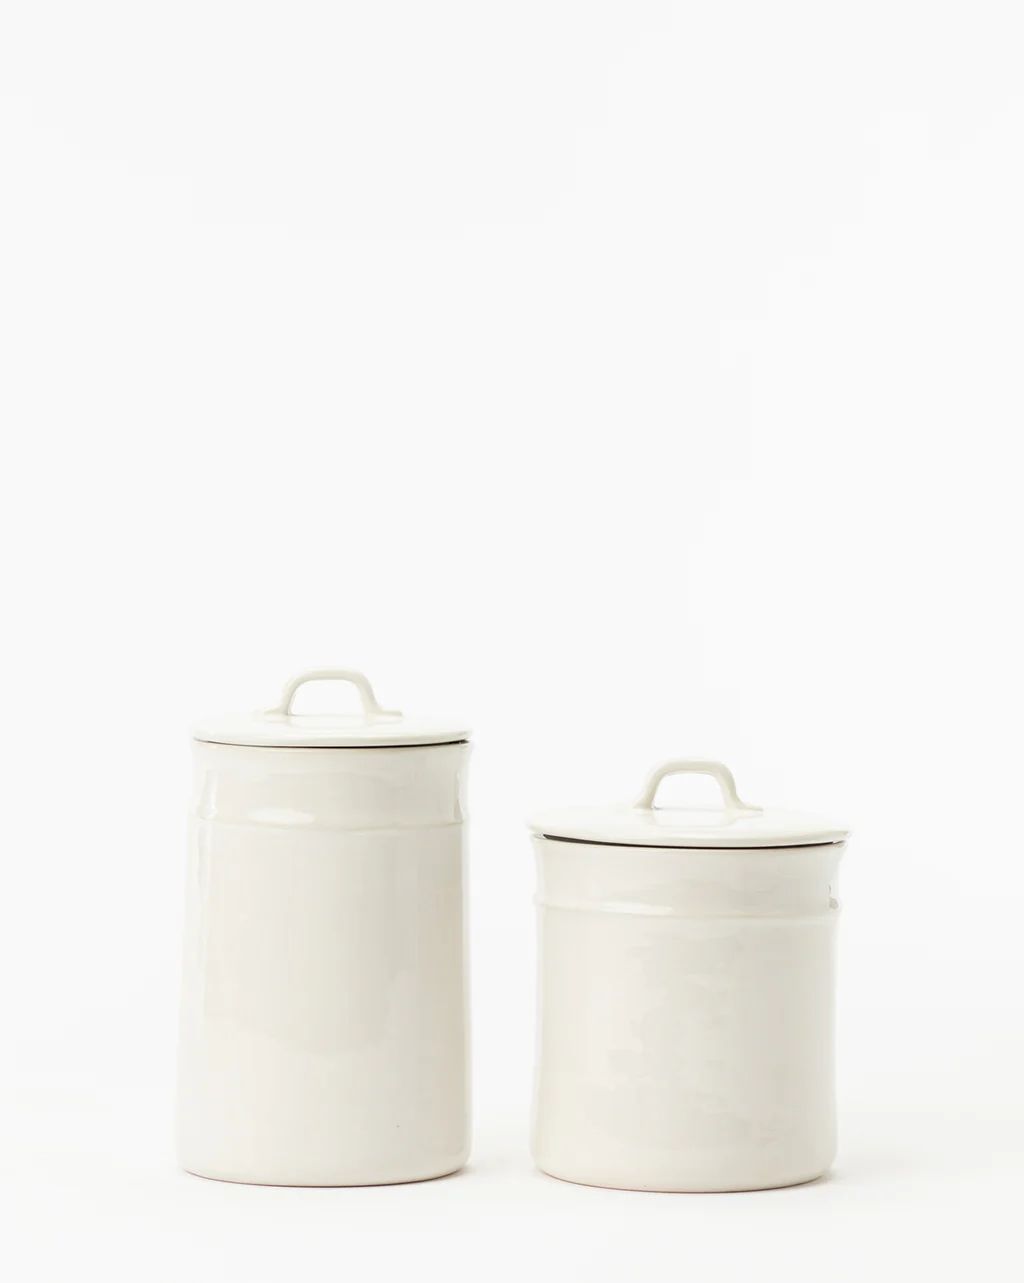 Handled Ceramic Canister | McGee & Co. (US)